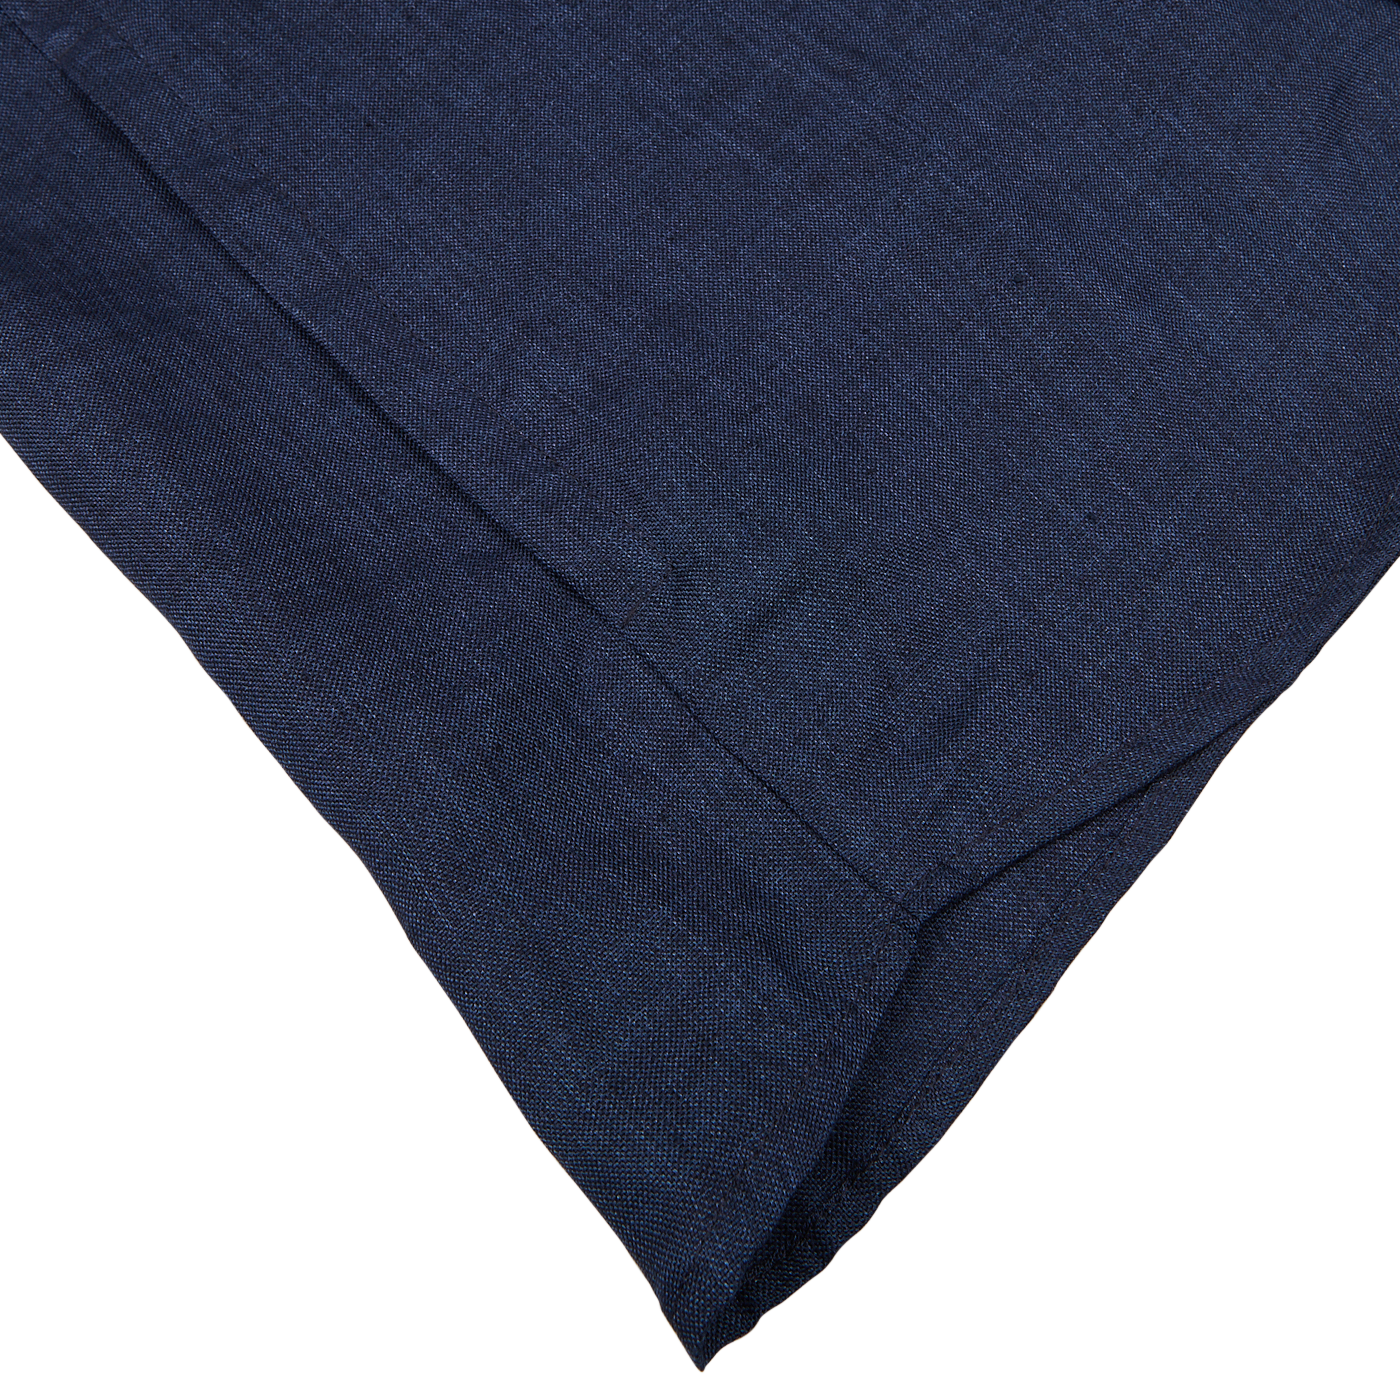 Close-up view of a Mazzarelli Dark Blue Organic Linen Overshirt with a neat fold, displaying its texture.